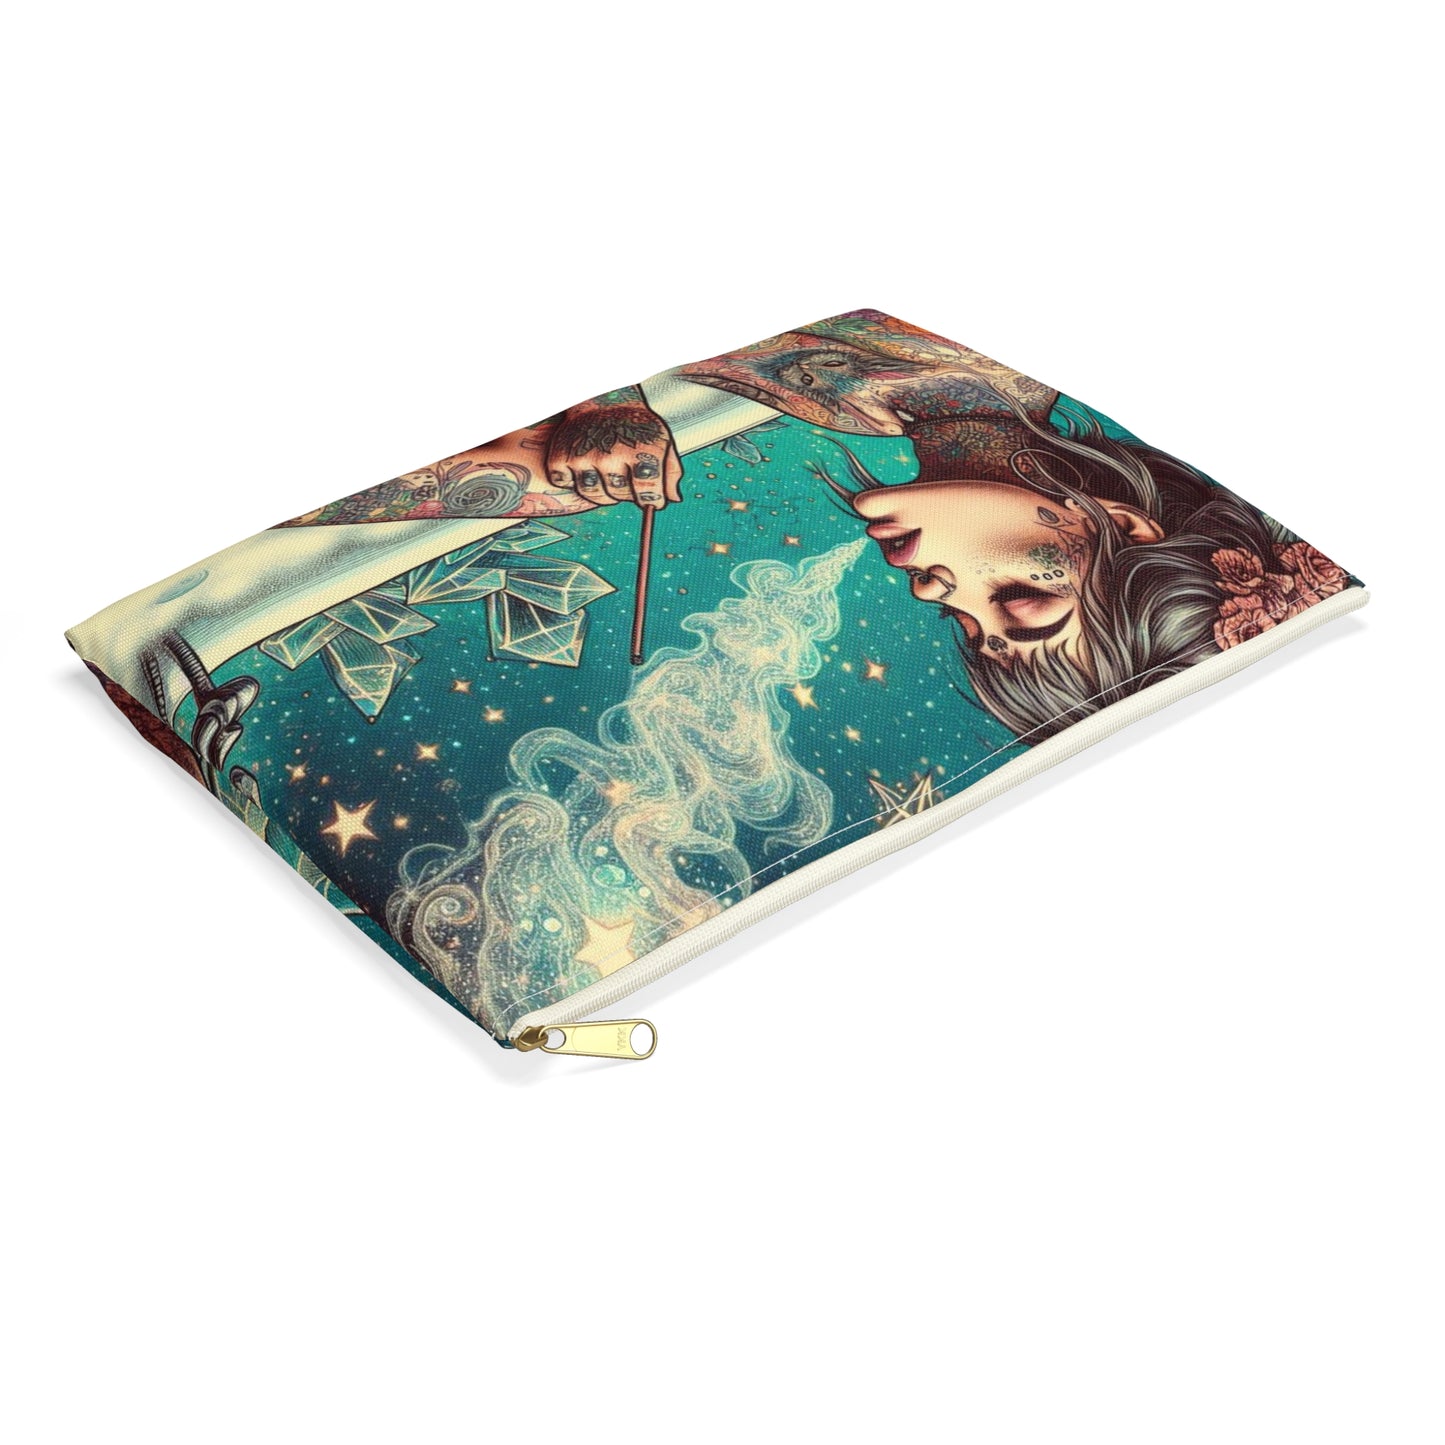 VIBIN' Reset & Recharge Accessory Pouch: Toiletries Bag, On-the-go Items, Tarot Deck, Crystals Bag